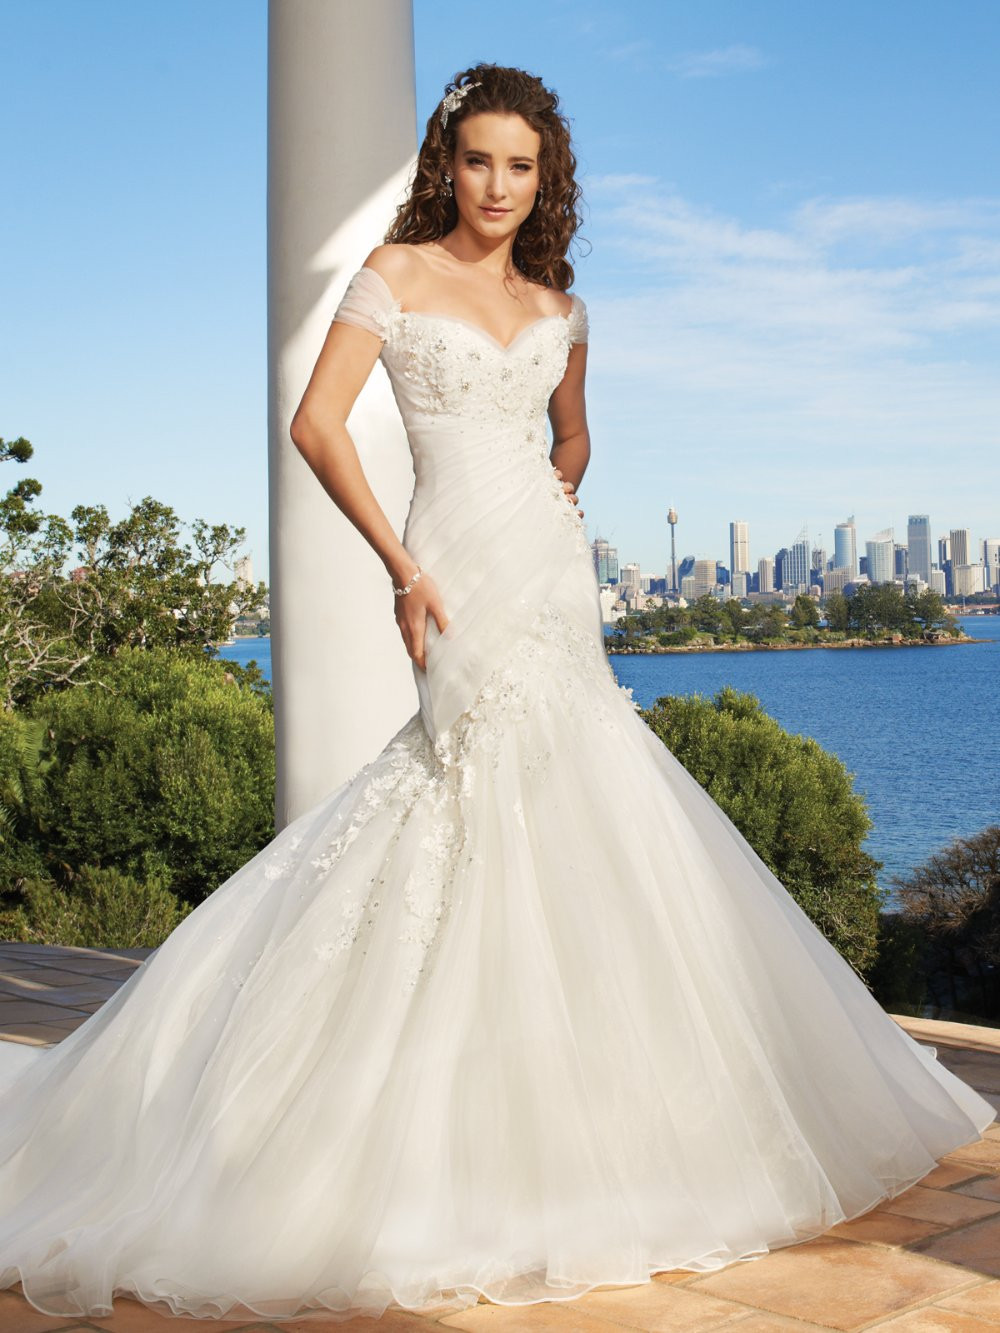 Sweetheart Wedding Gown
 Exclusively modern mermaid gown sweetheart neckline ruched